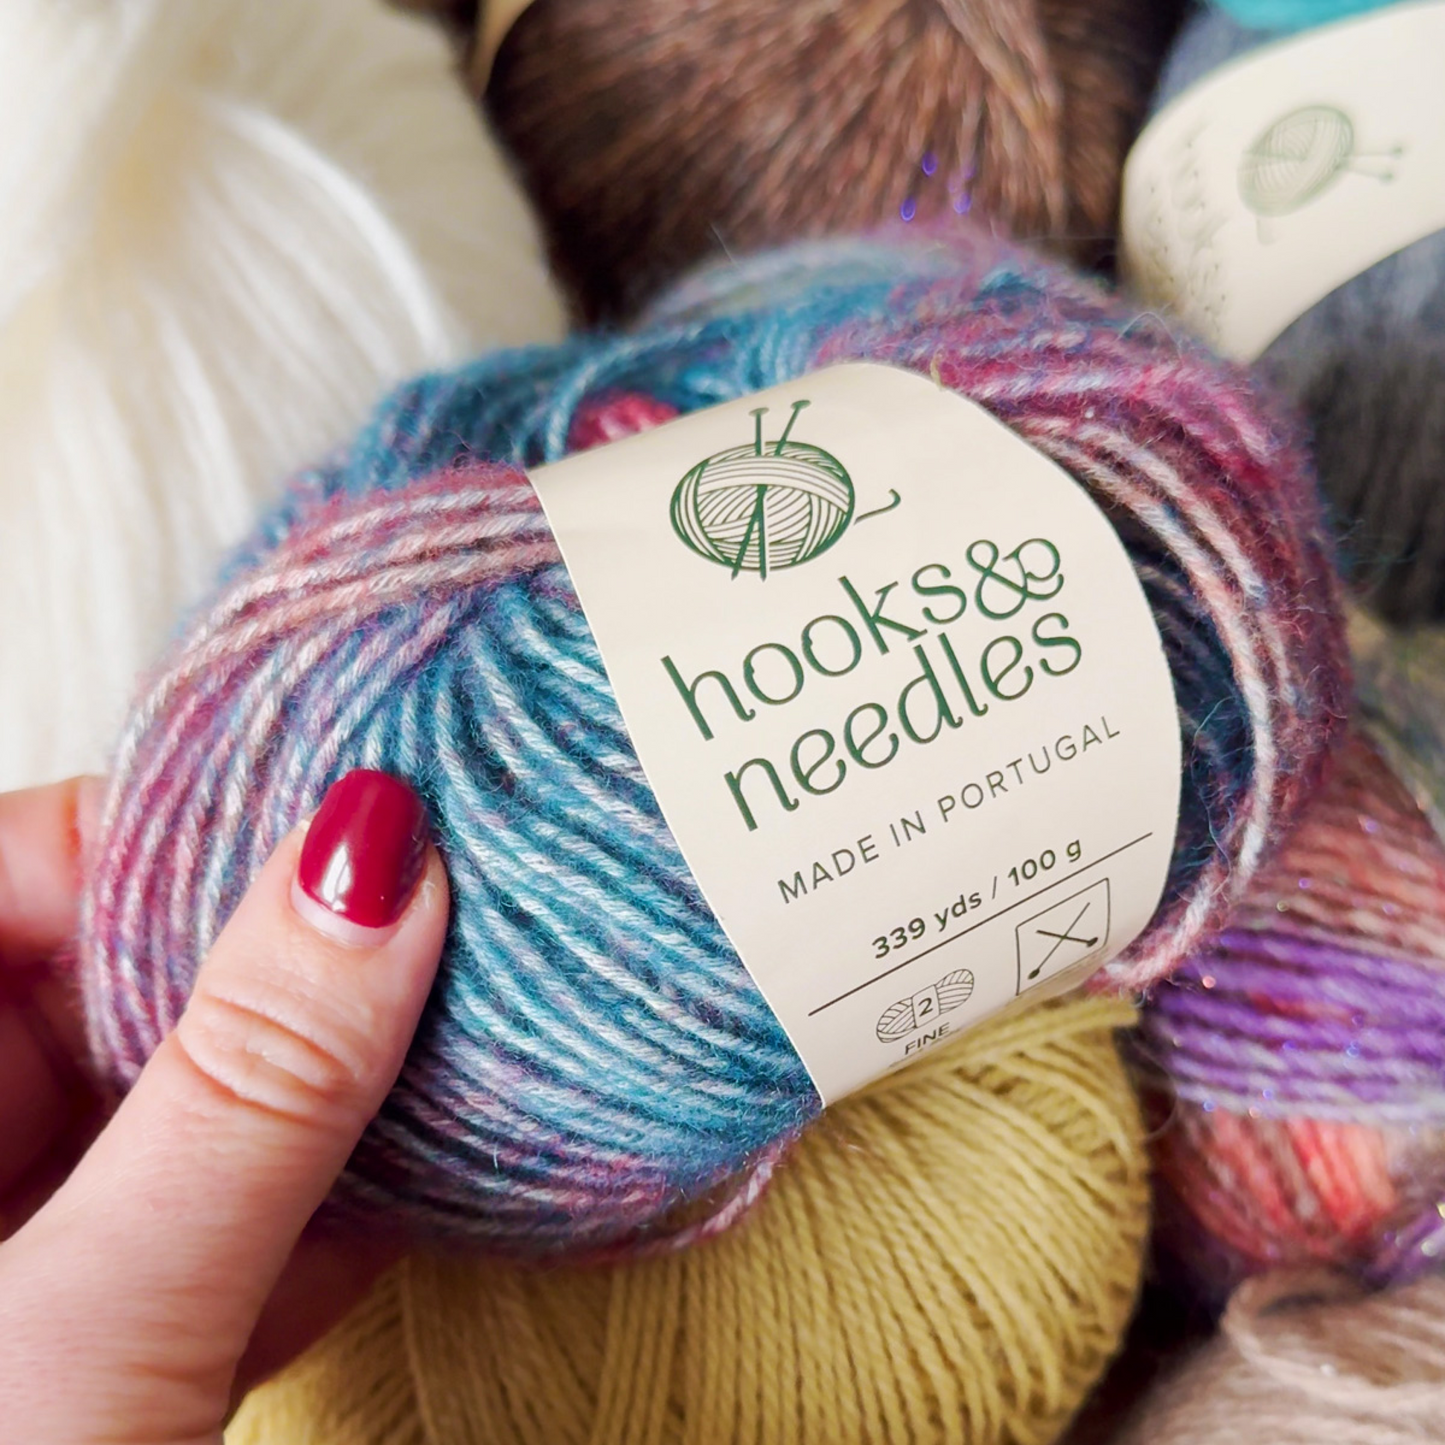 A close-up of a hand holding a skein of multicolored yarn with a [12-Month-Prepaid] Hooks & Needles Subscription Box #11 indicating it is made in Portugal.